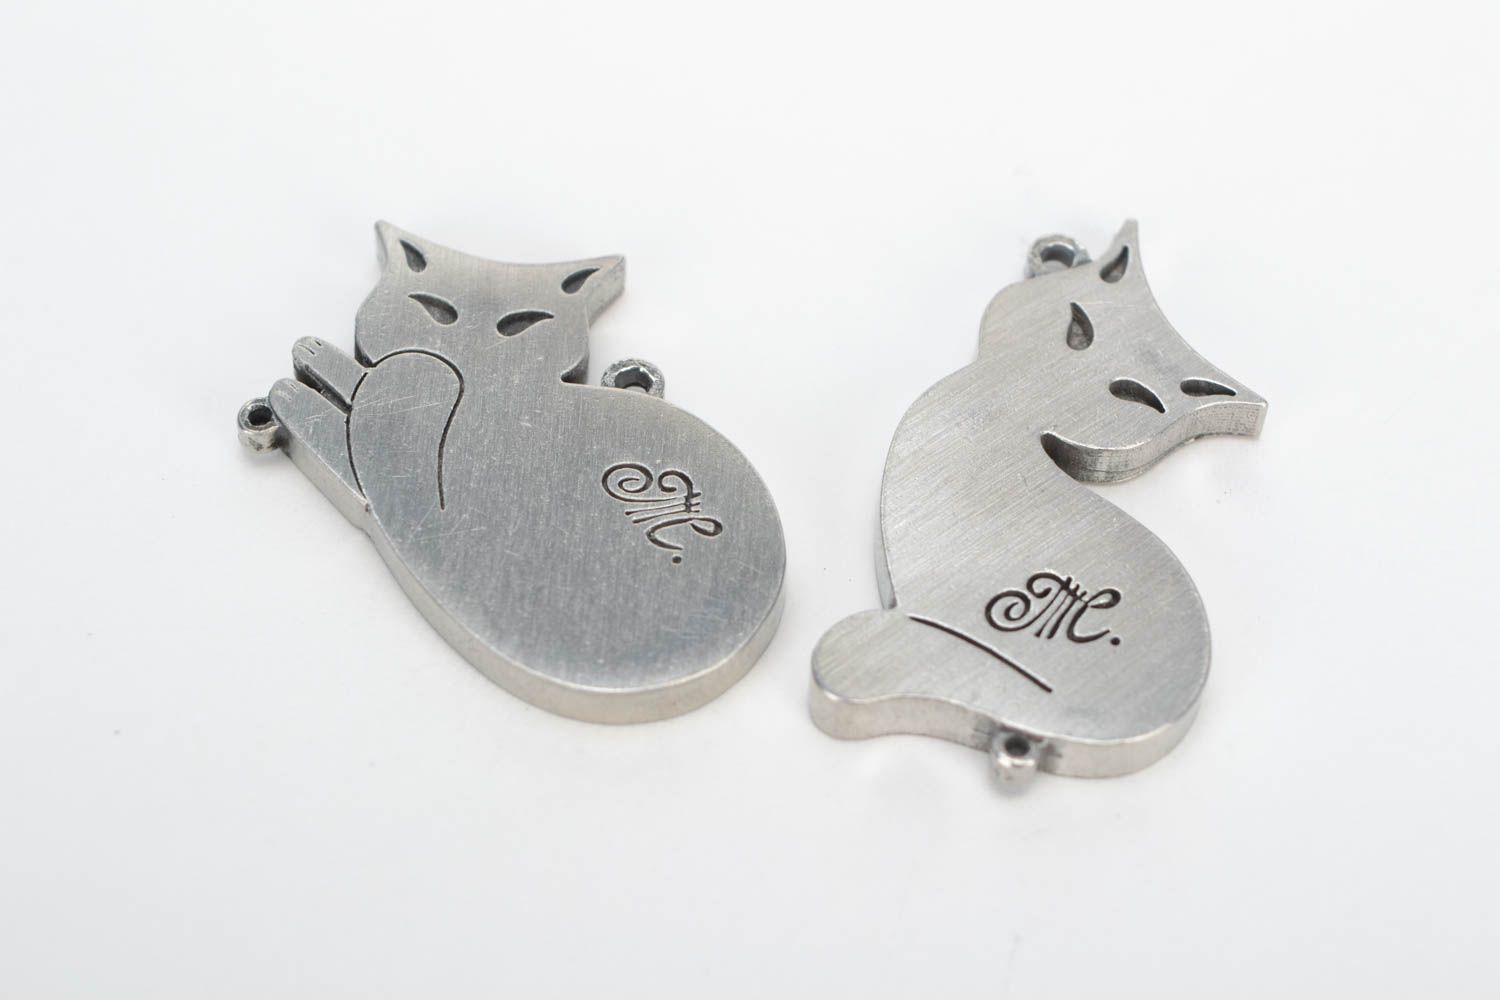 Blanks for jewelry creating pendants cats set of 2 pieces metal accessories photo 4